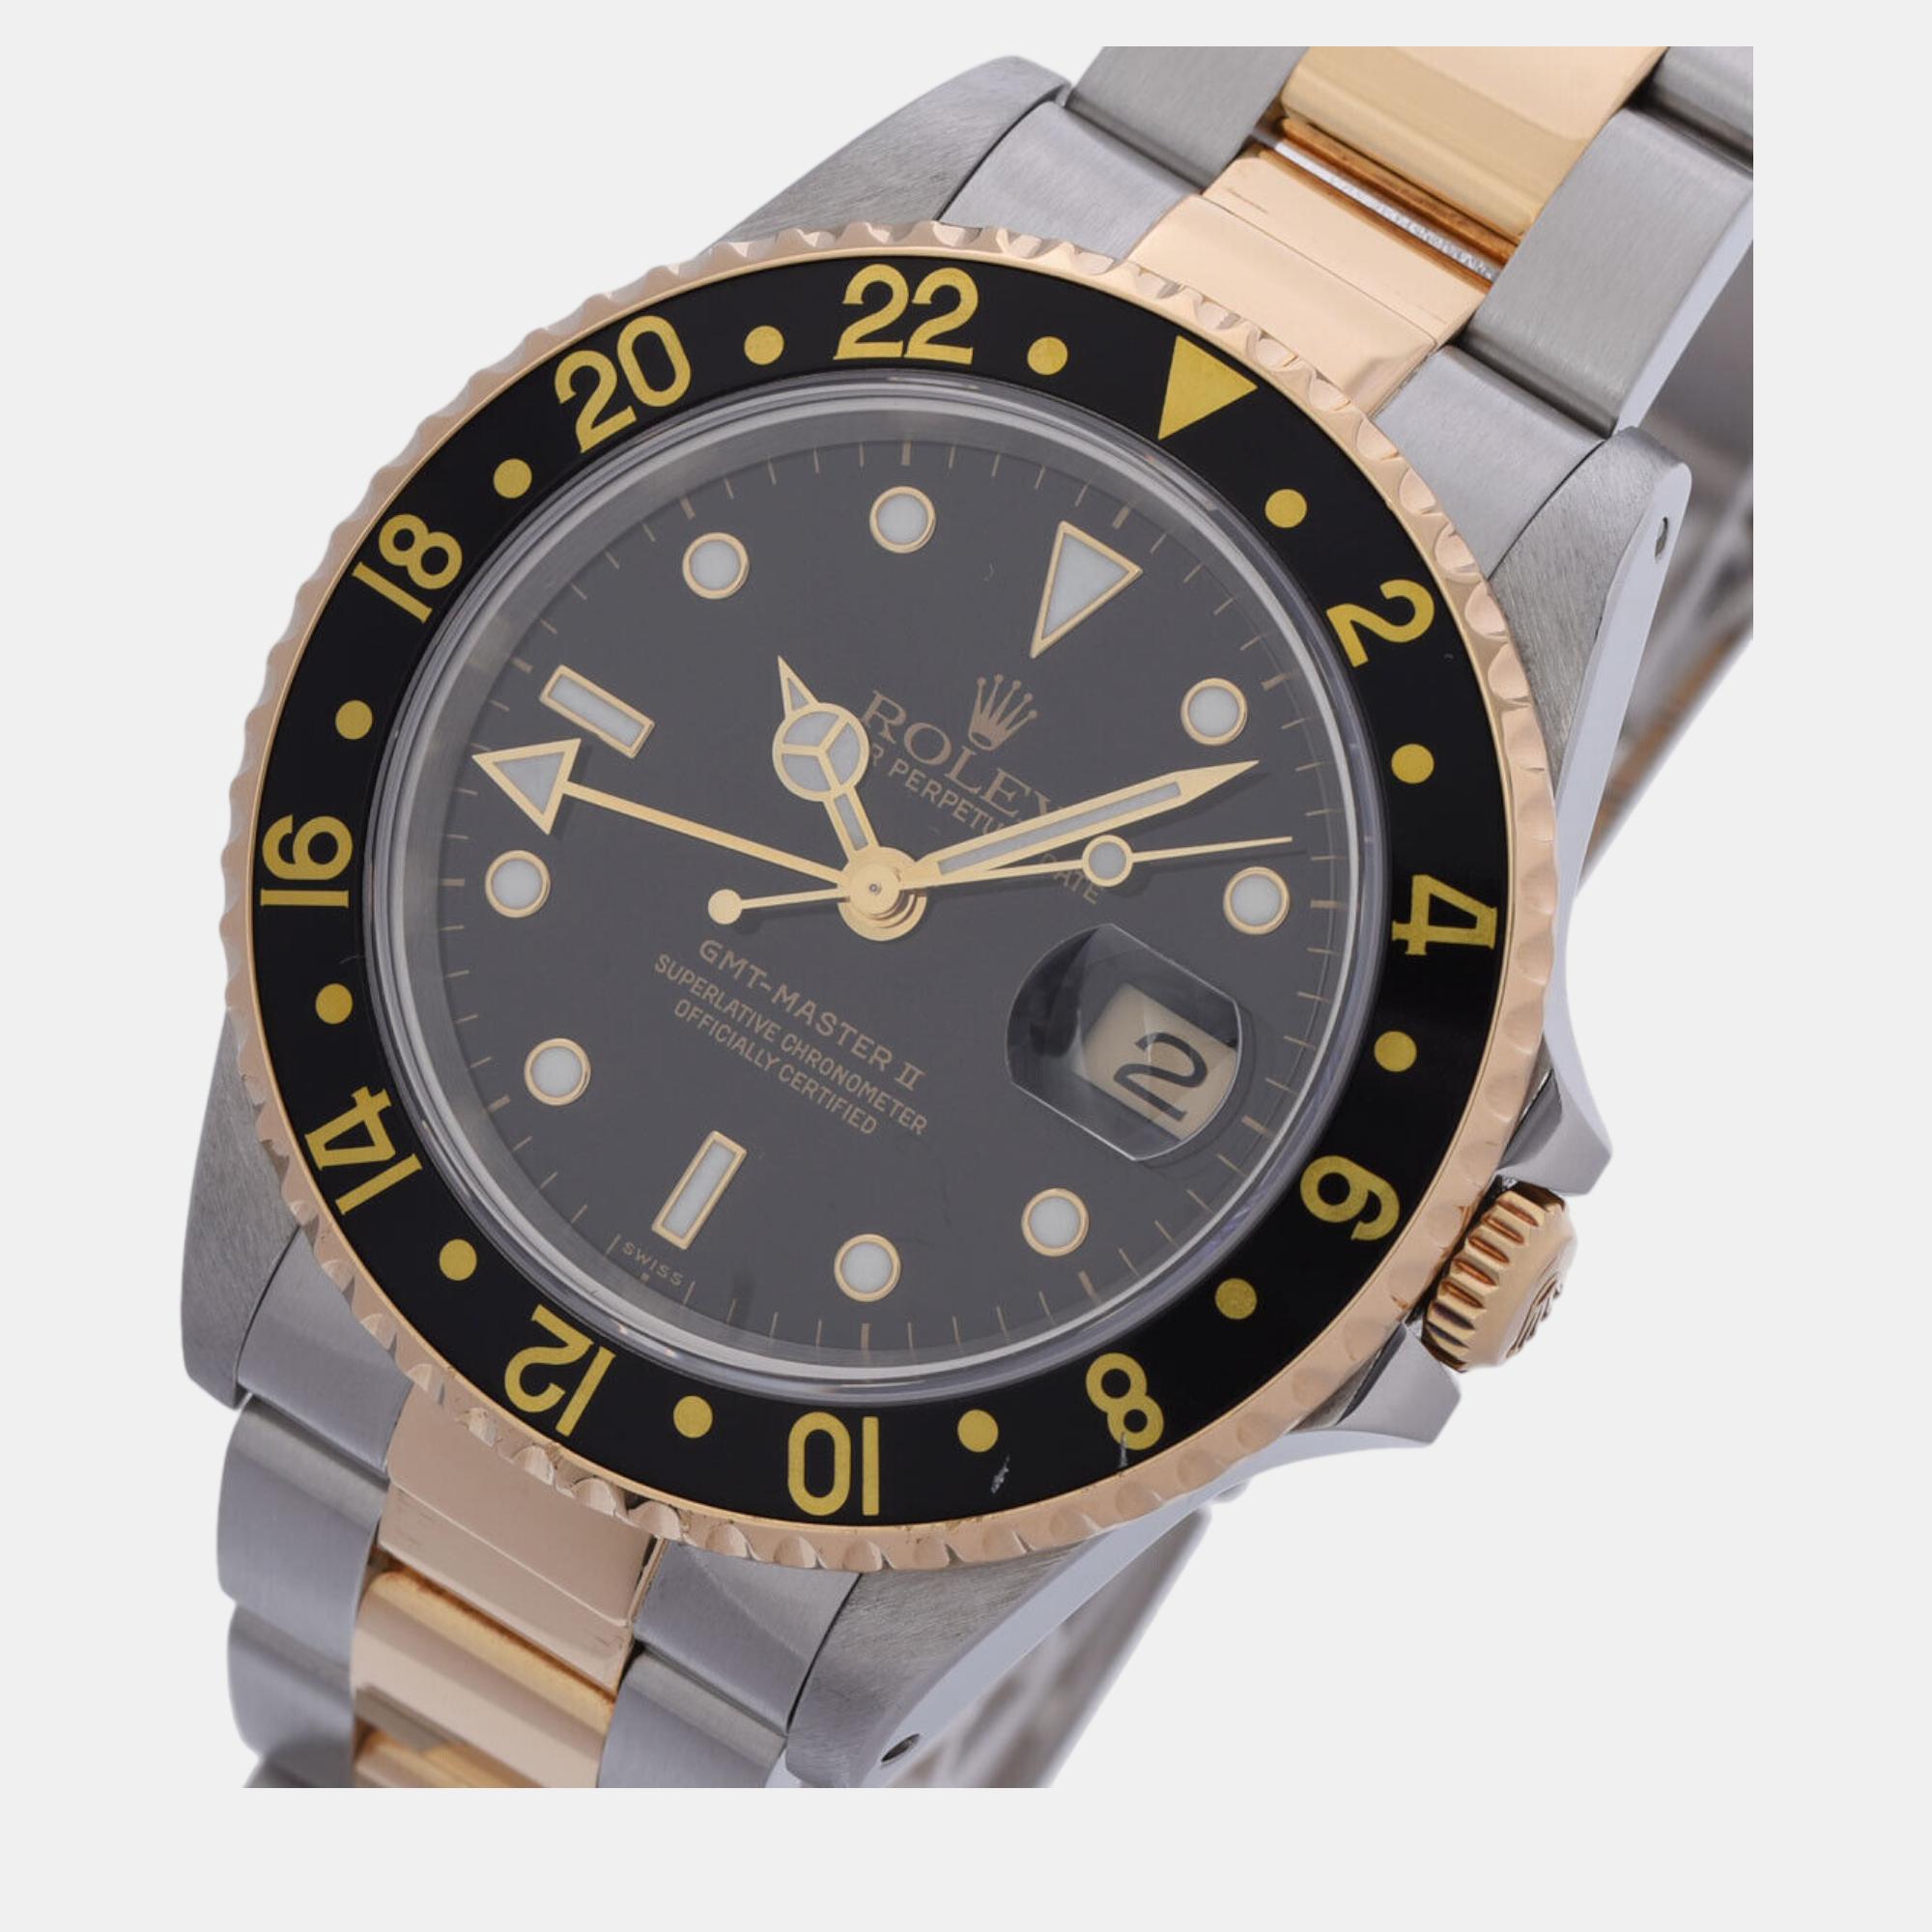 

Rolex Black 18k Yellow Gold And Stainless Steel GMT-Master II 16713 Automatic Men's Wristwatch 40 mm